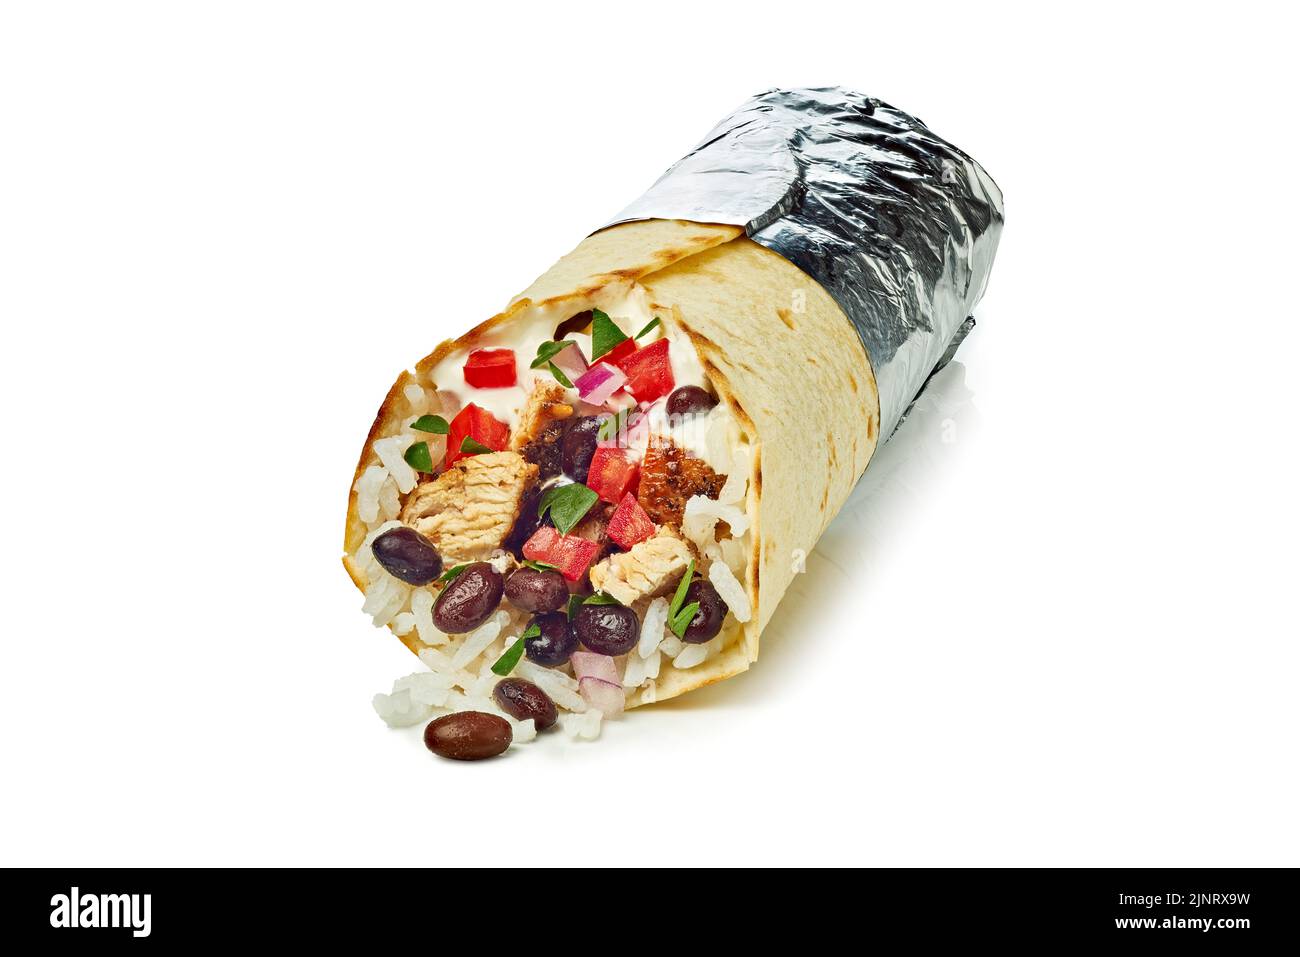 Chicken burrito with rice and black beans on white background Stock Photo